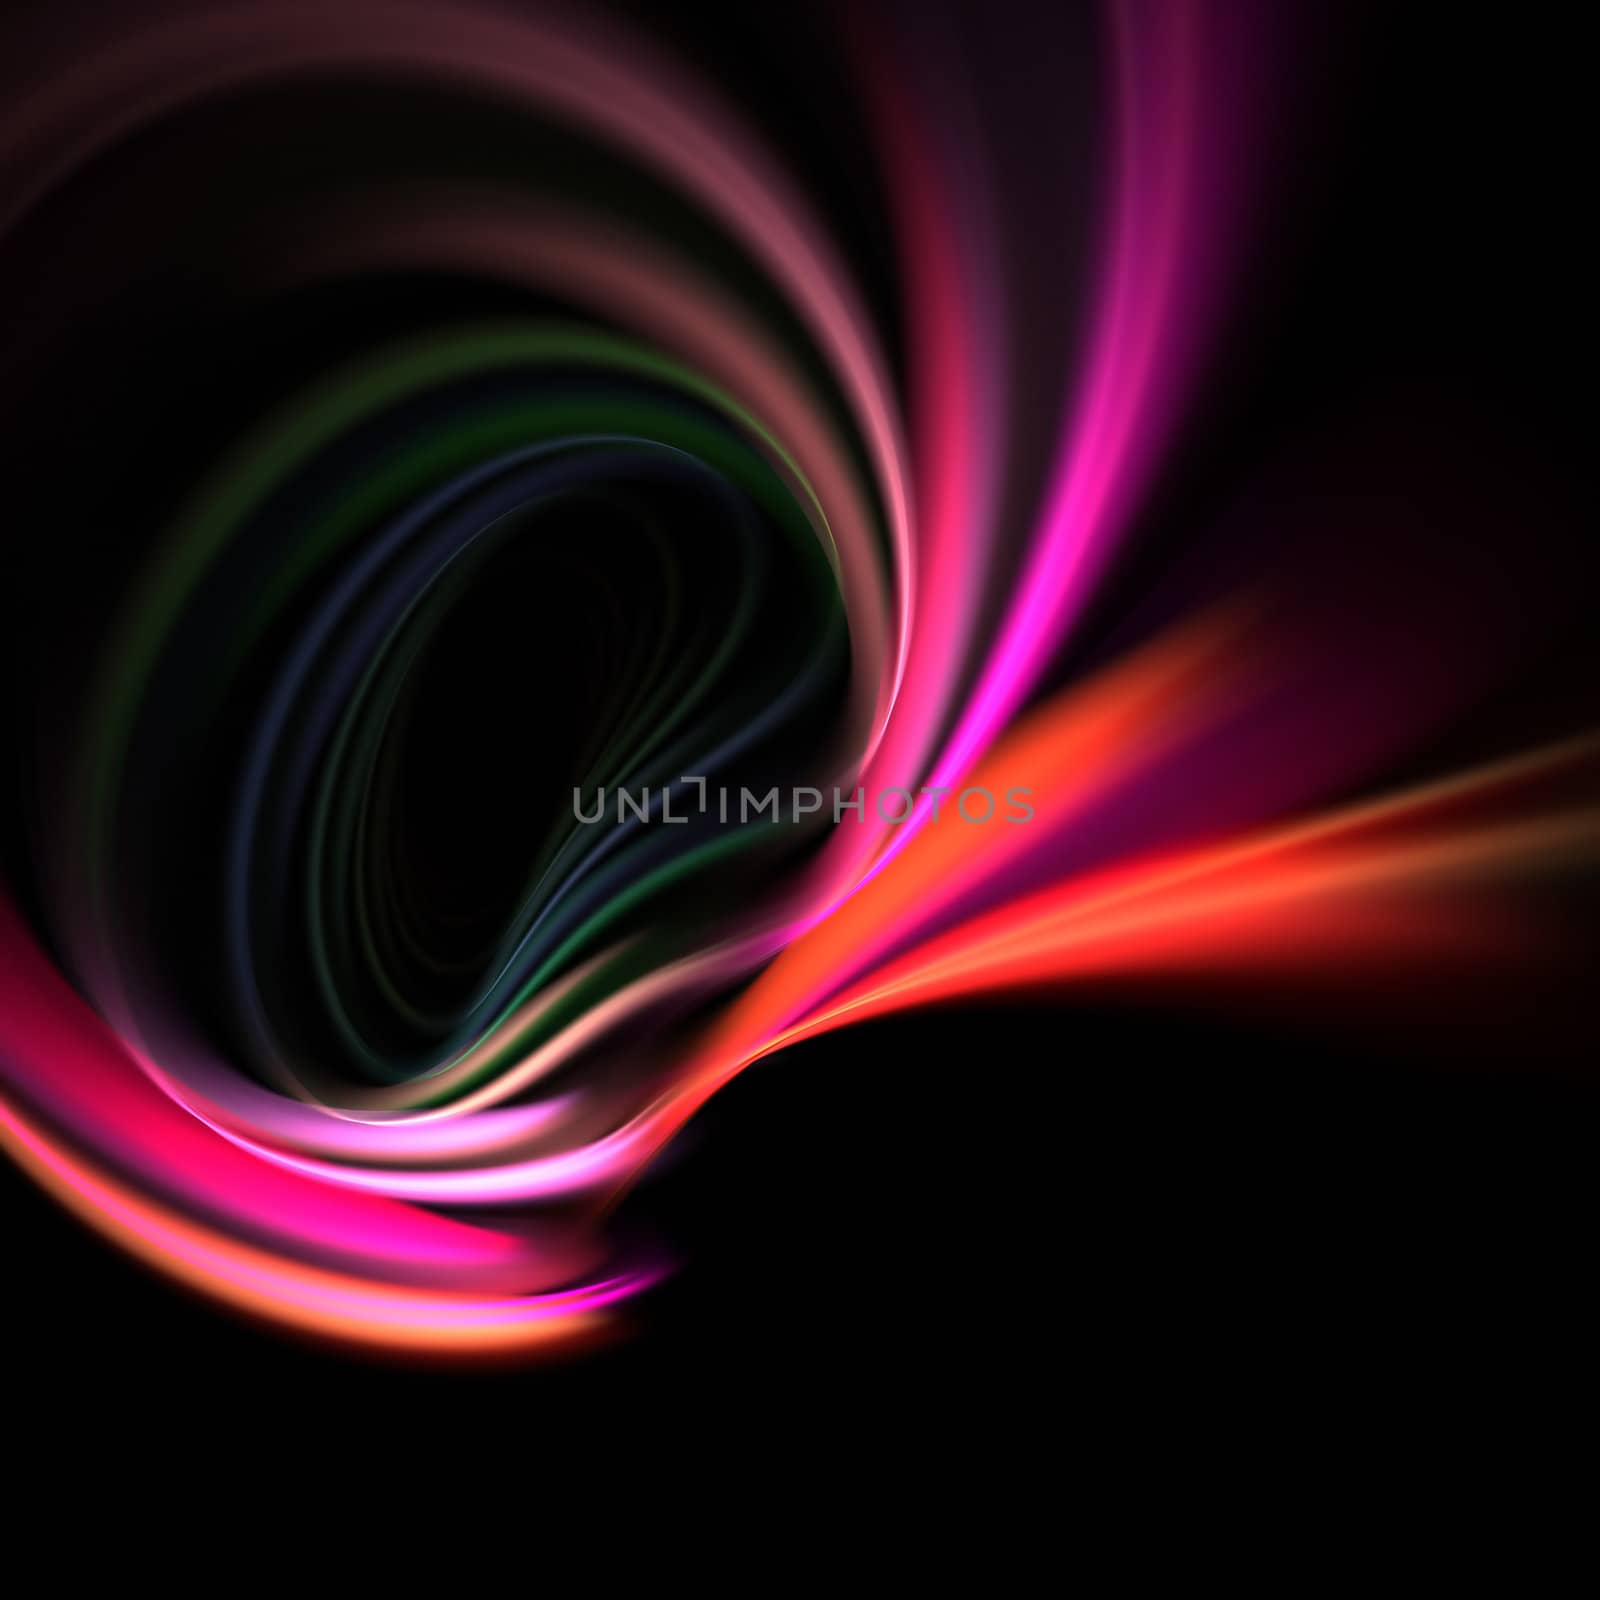 A glowing fractal vortex that works great as a background or backdrop.